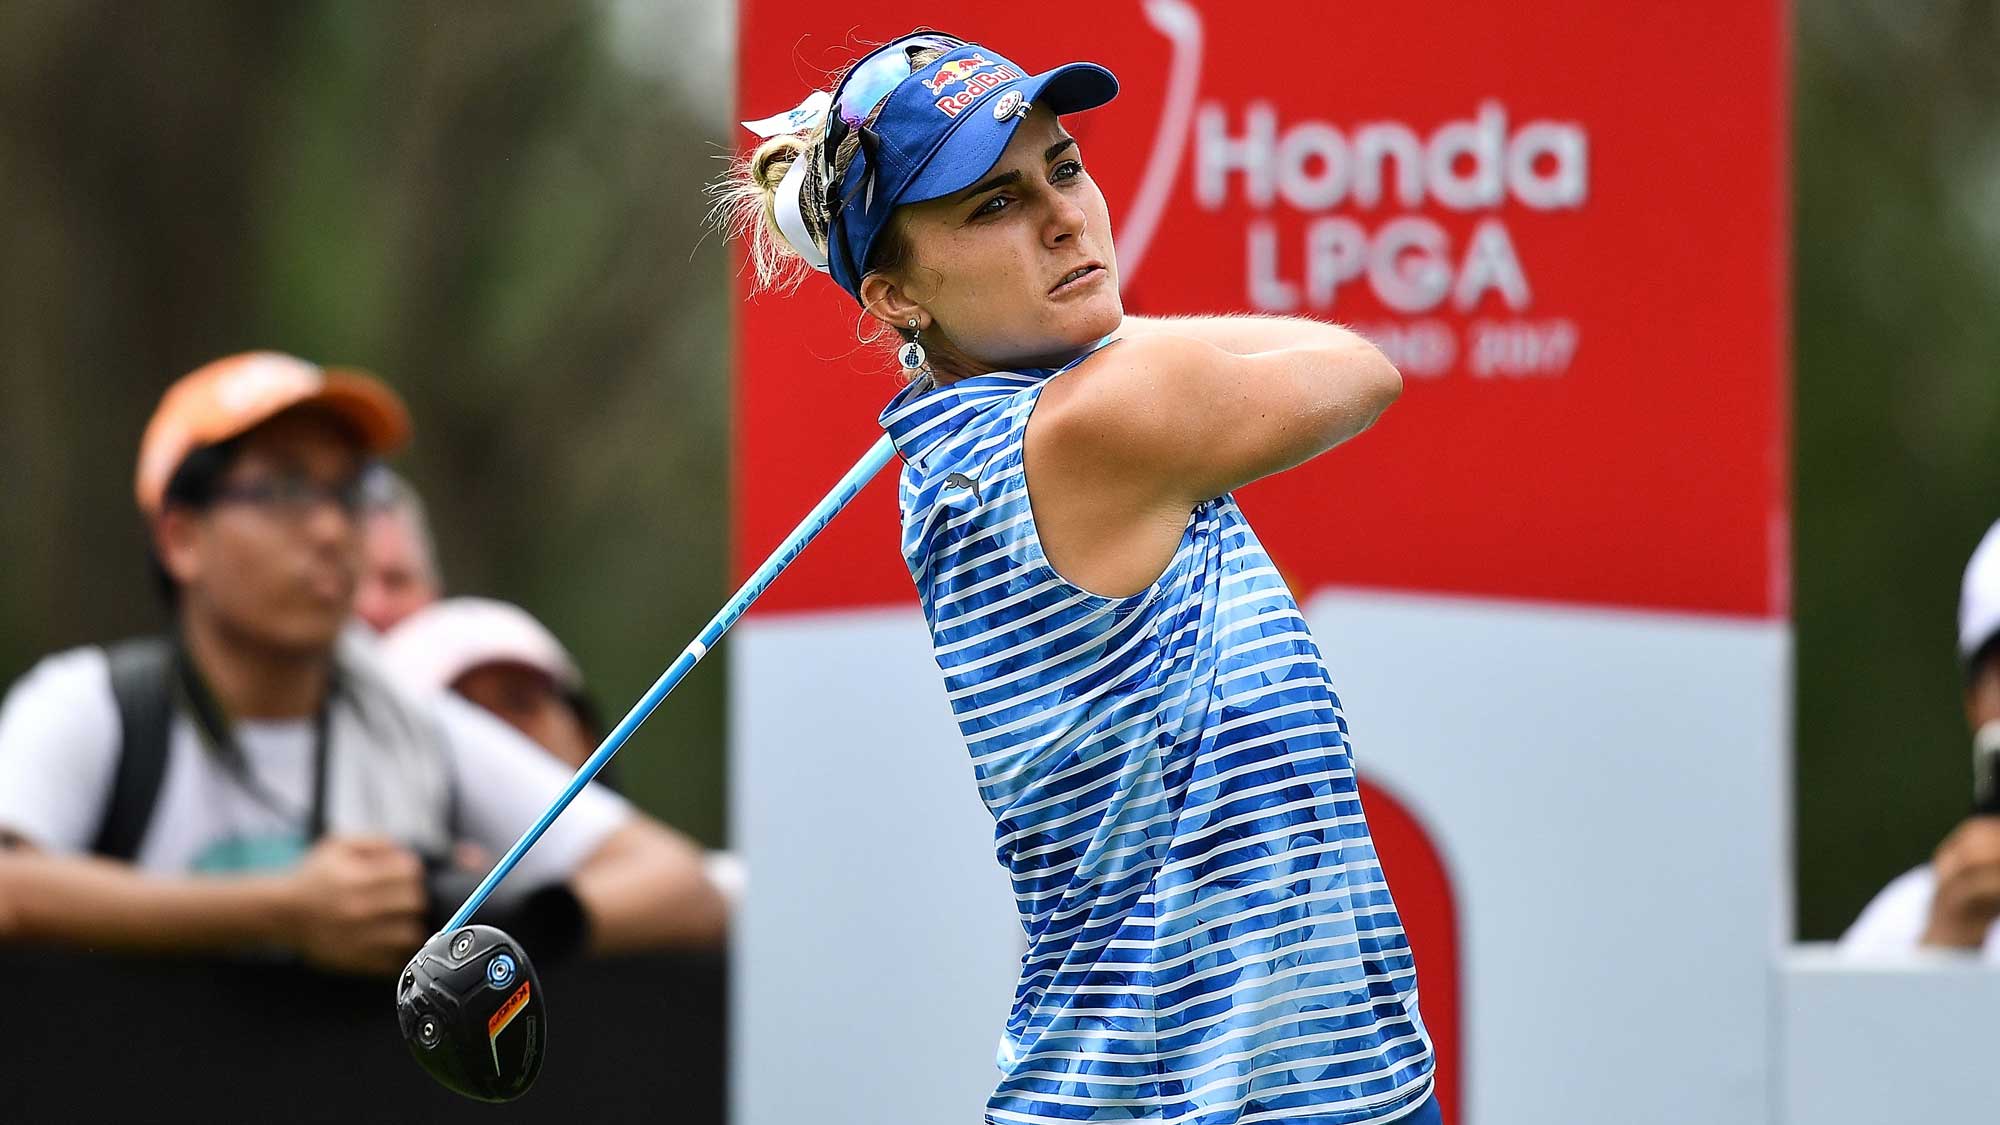 Lexi Thompson of United States tee off at 9th hole during the final round of Honda LPGA Thailand